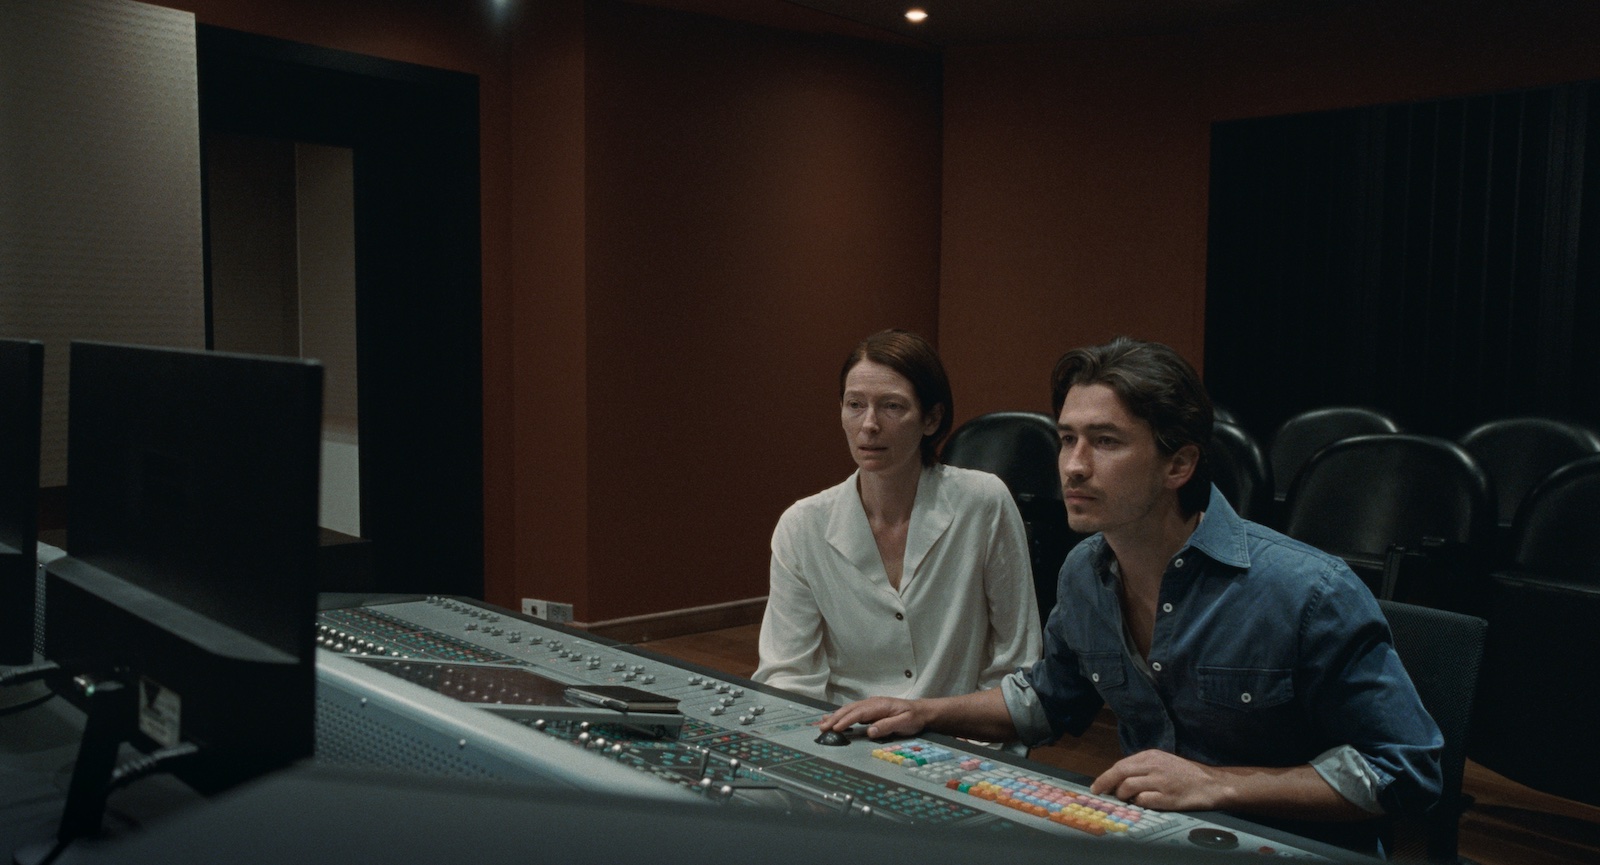 A woman and a man sit at a sound mixing board in a recording studio